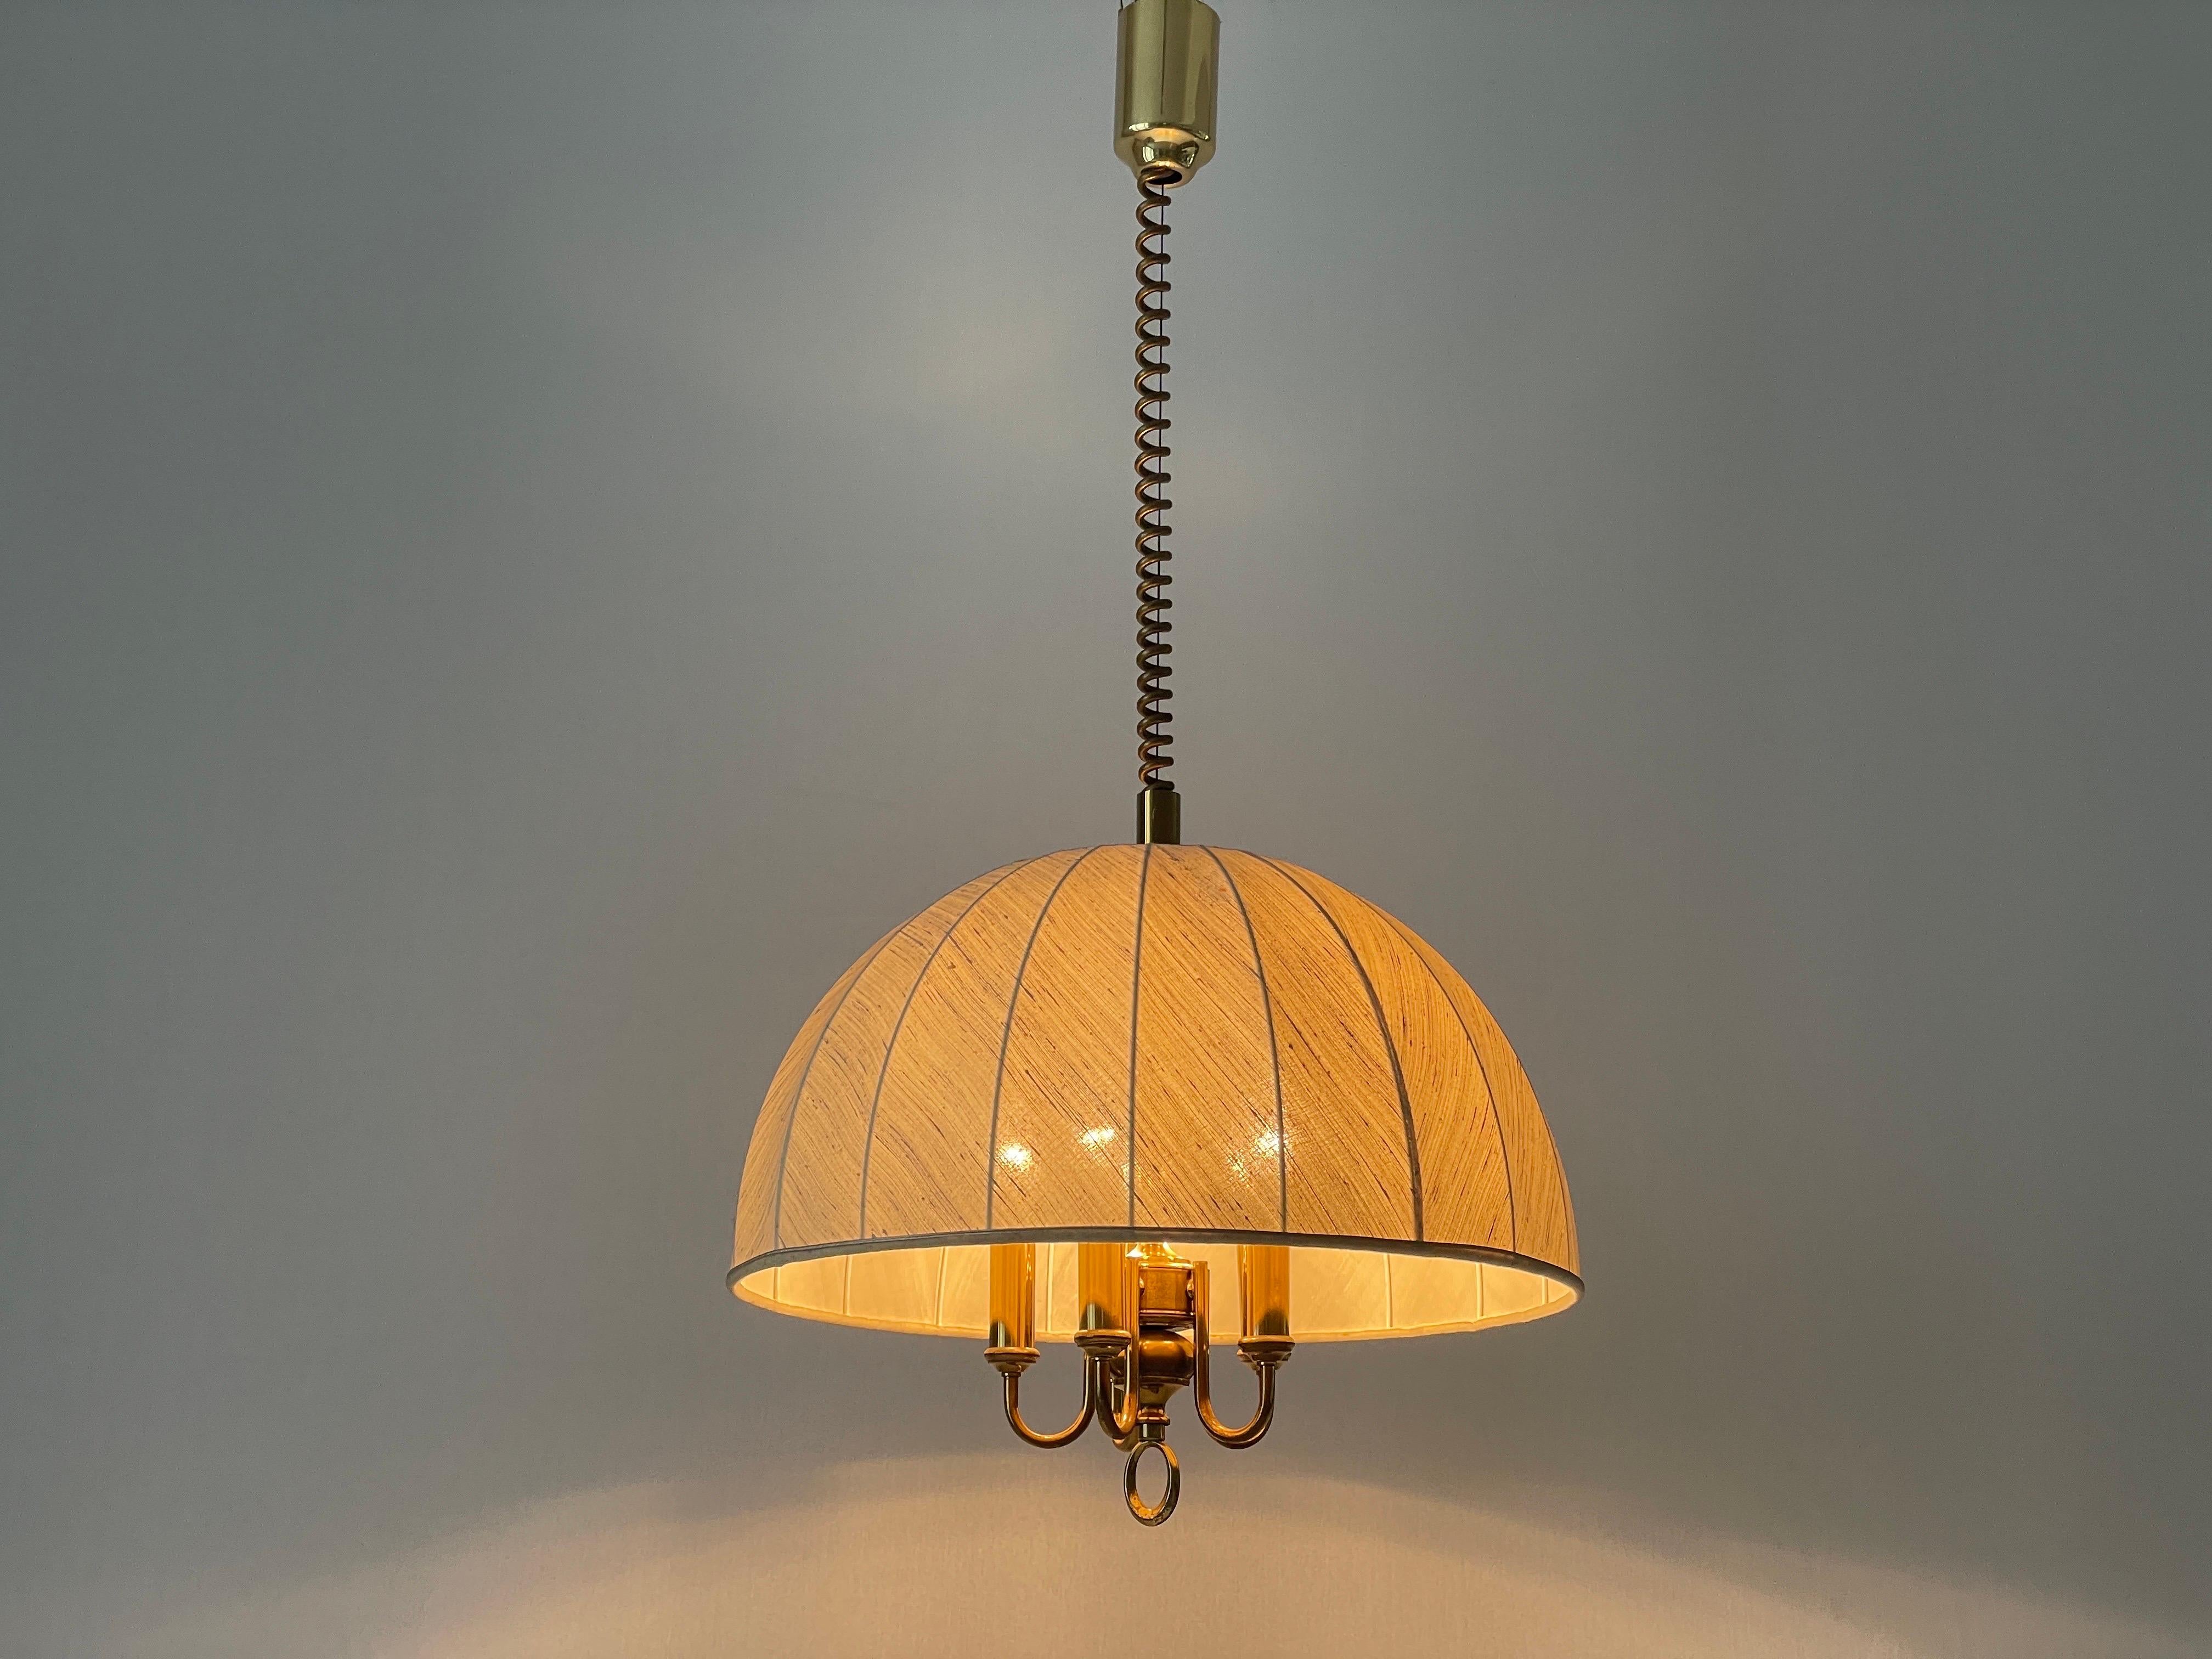 Fabric and Brass 5 socket Adjustable Shade Pendant Lamp by WKR, 1970s, Germany For Sale 6